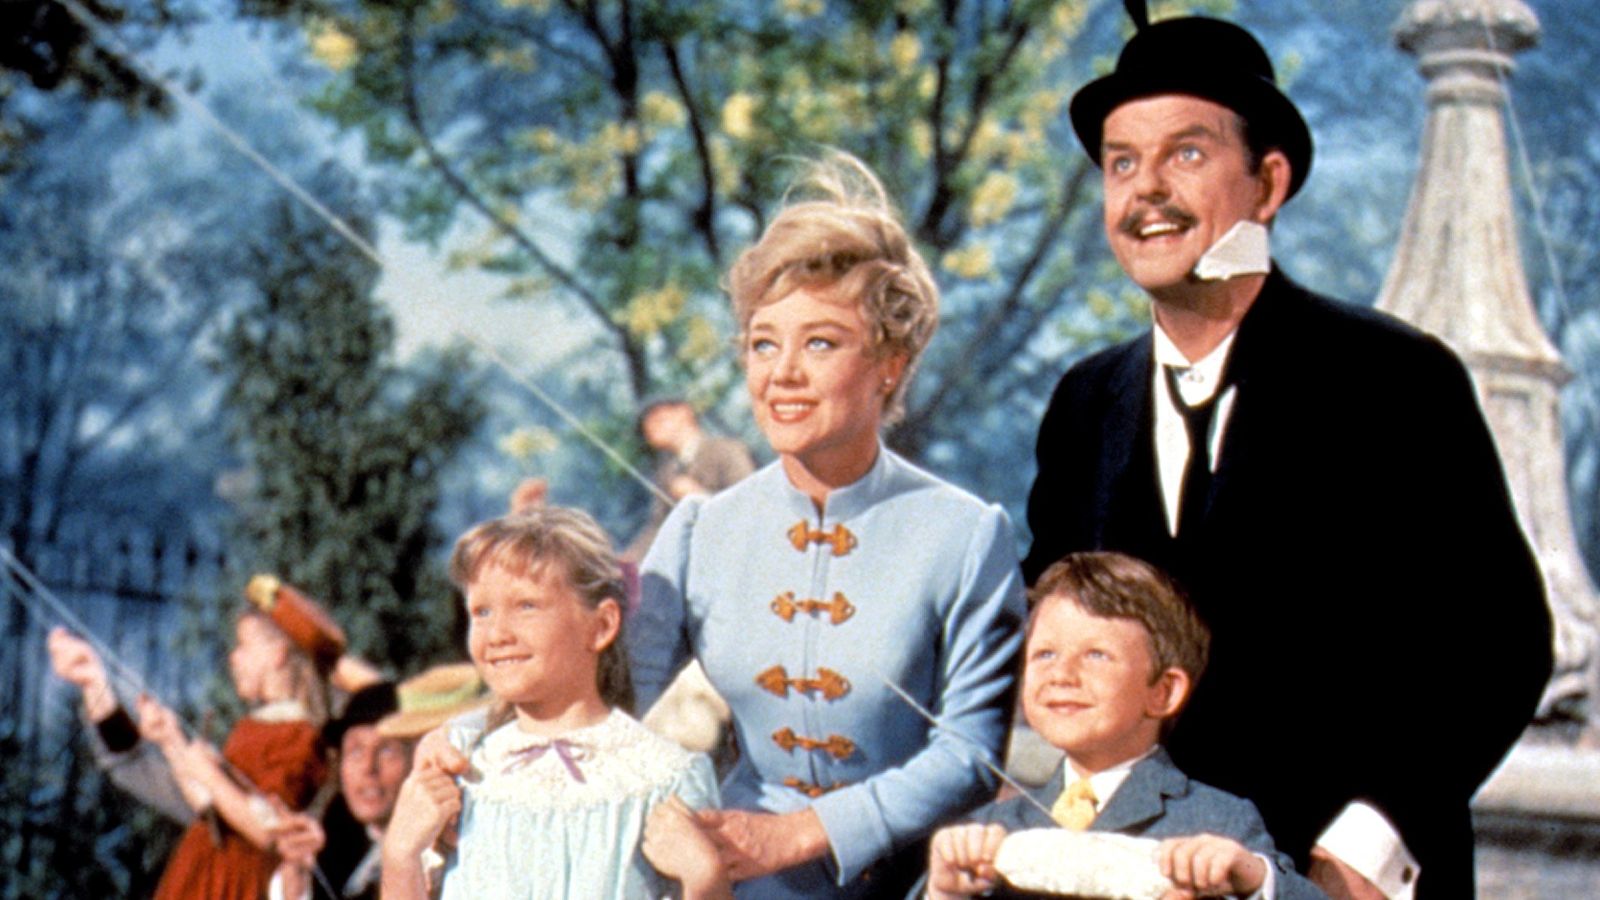 Mary Poppins actress Glynis Johns has died